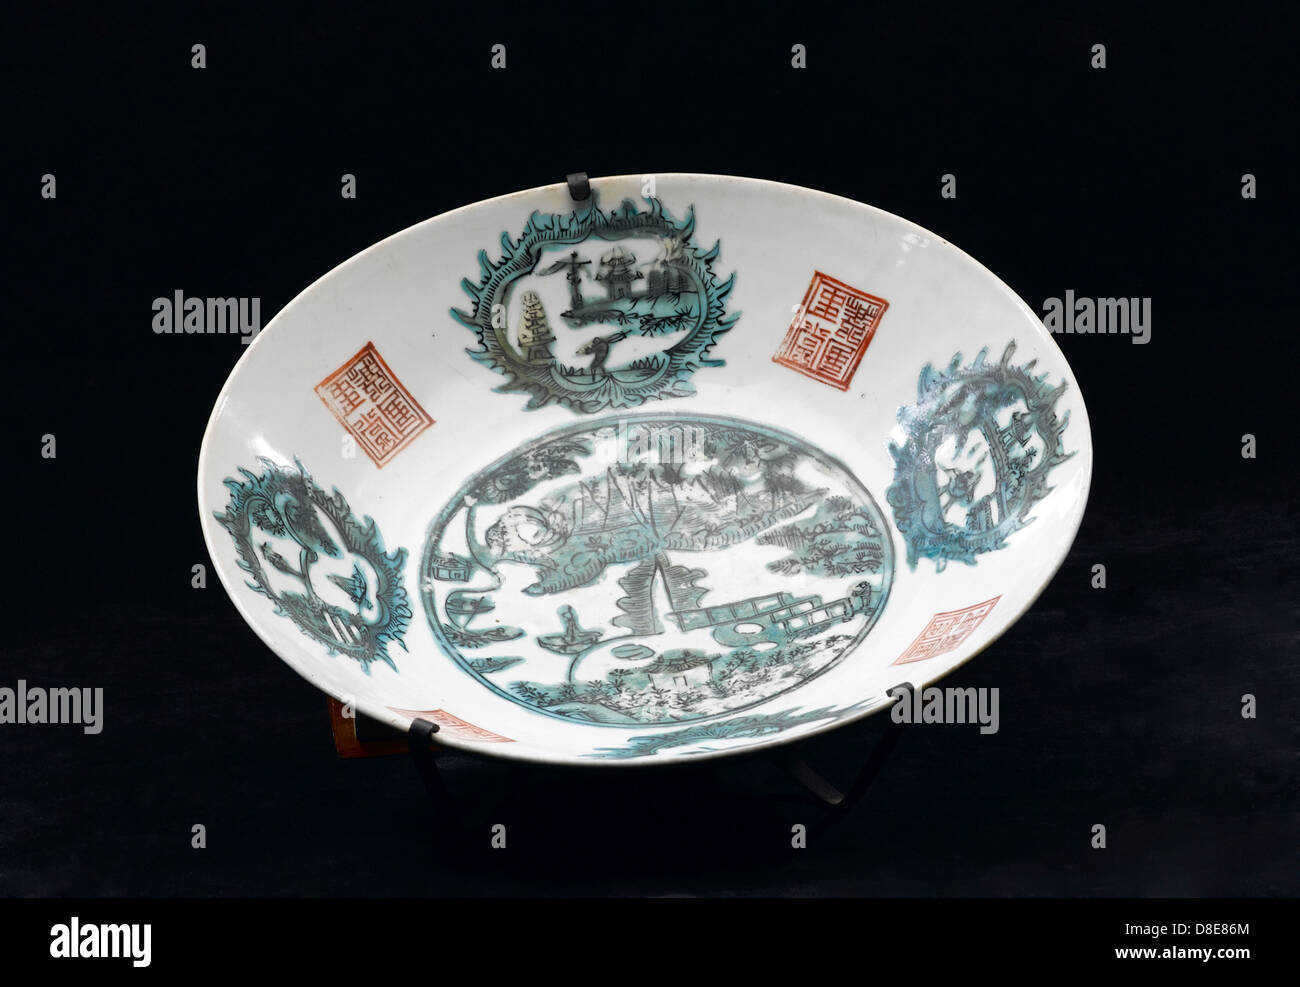 An antique Chinese bowl for collectible Stock Photo